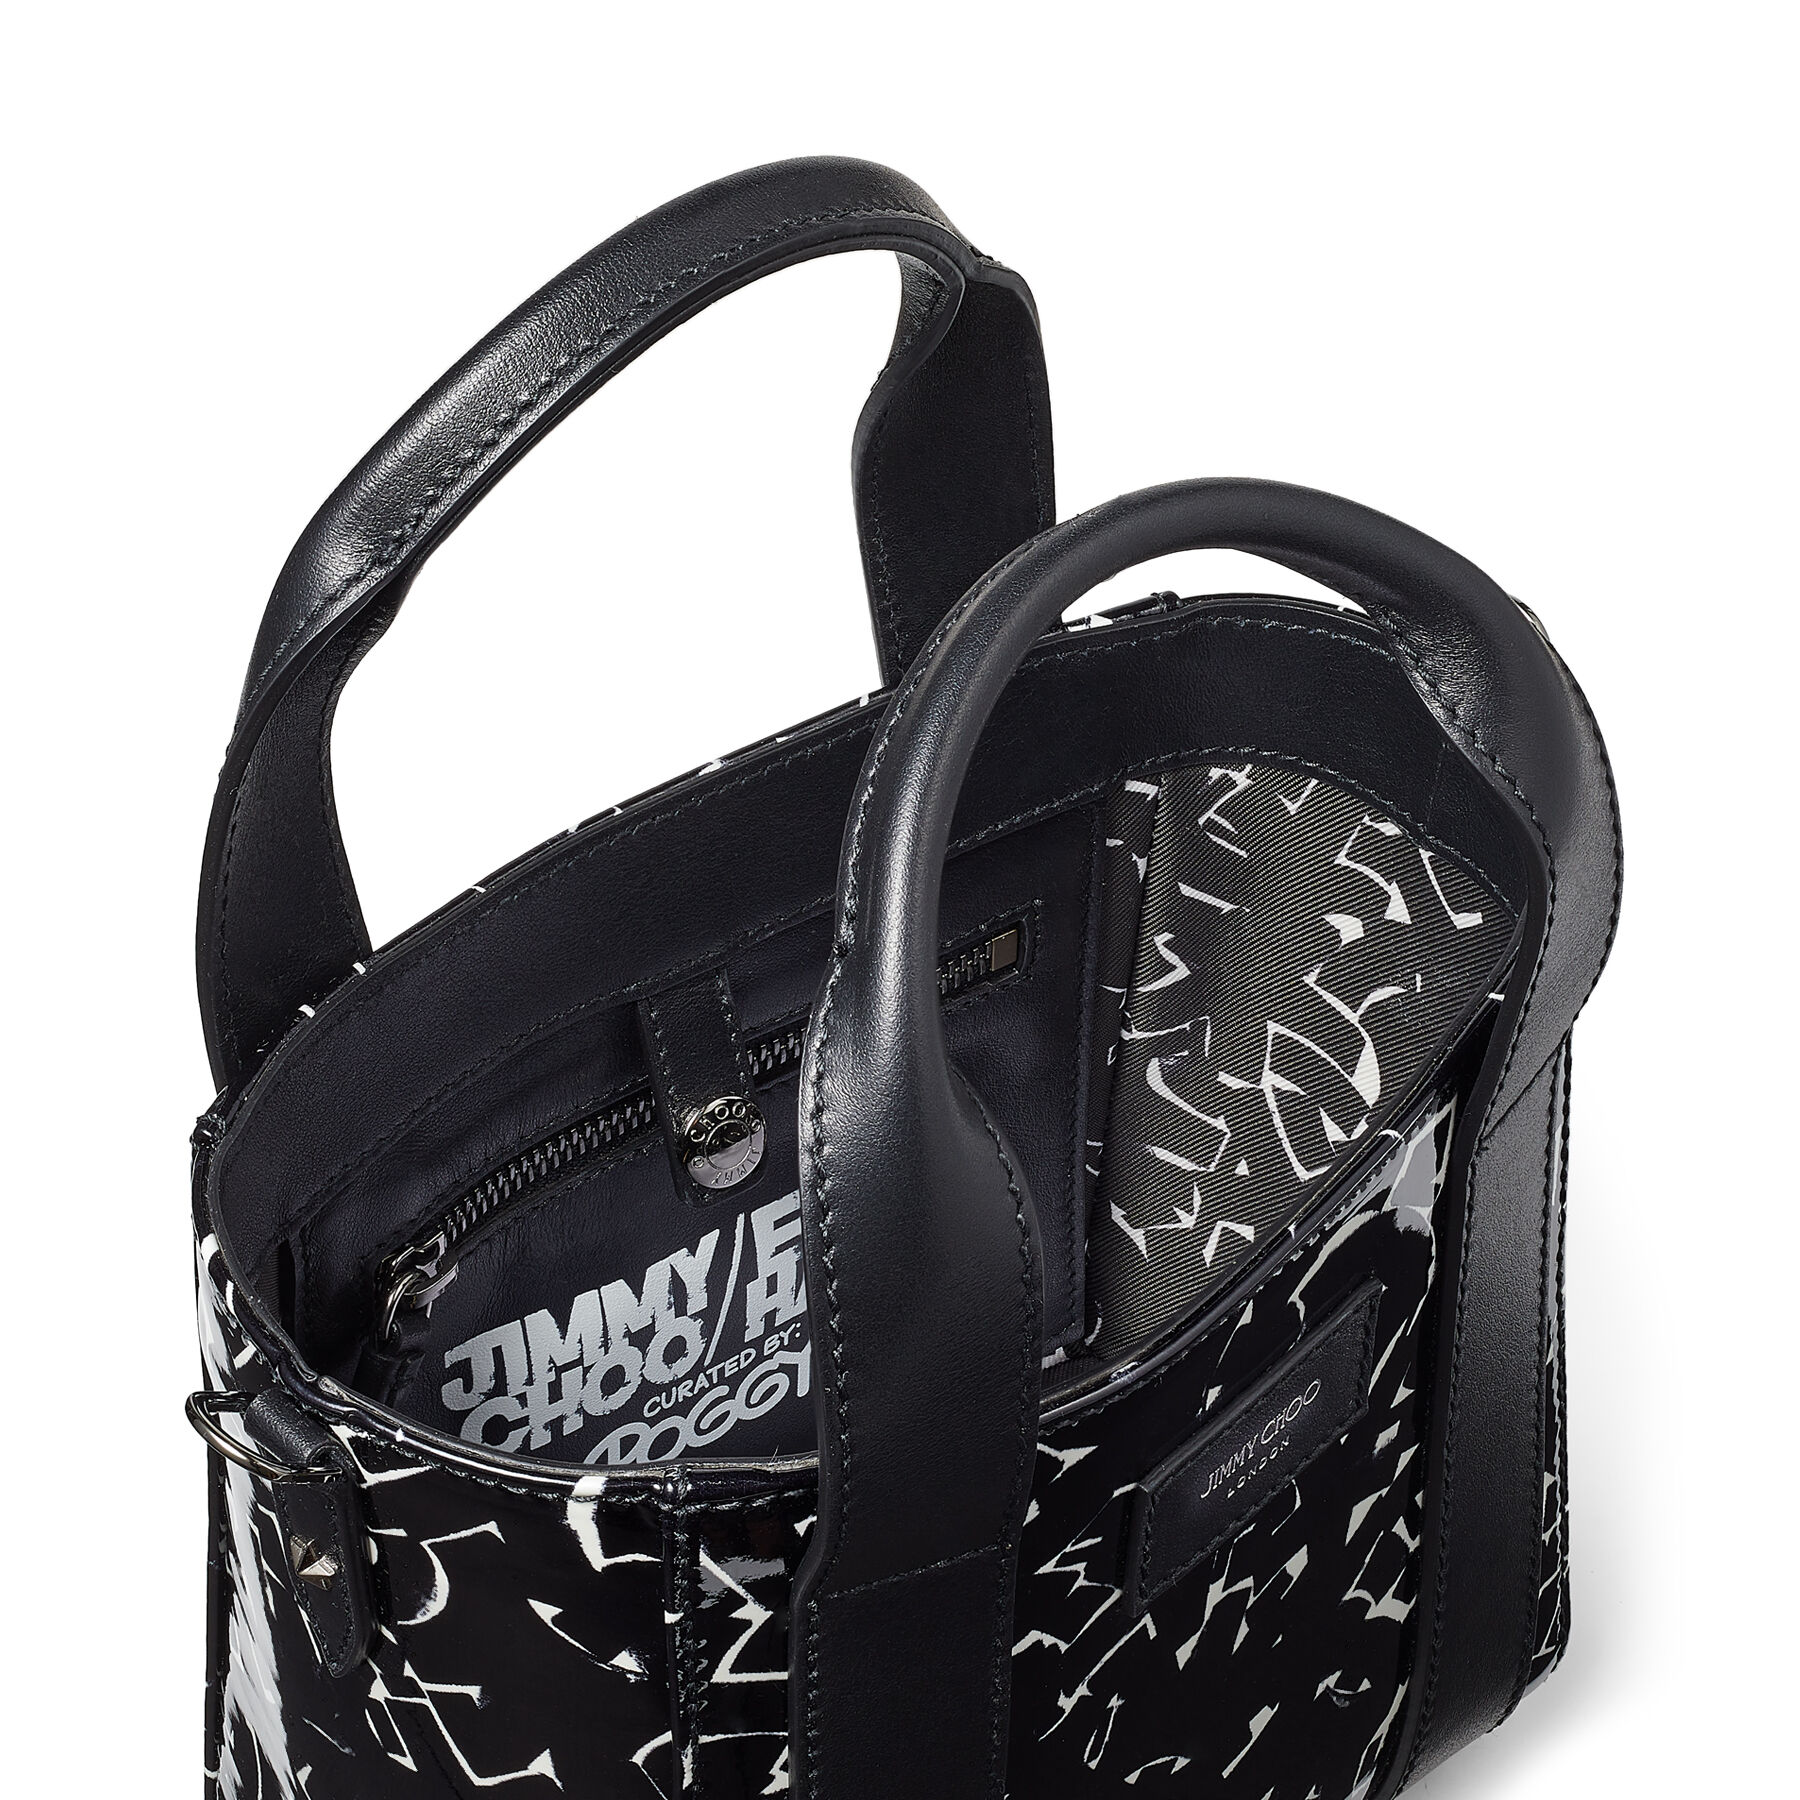 Black and White Artwork Printed Patent Leather Tote Bag | SHOPPER 